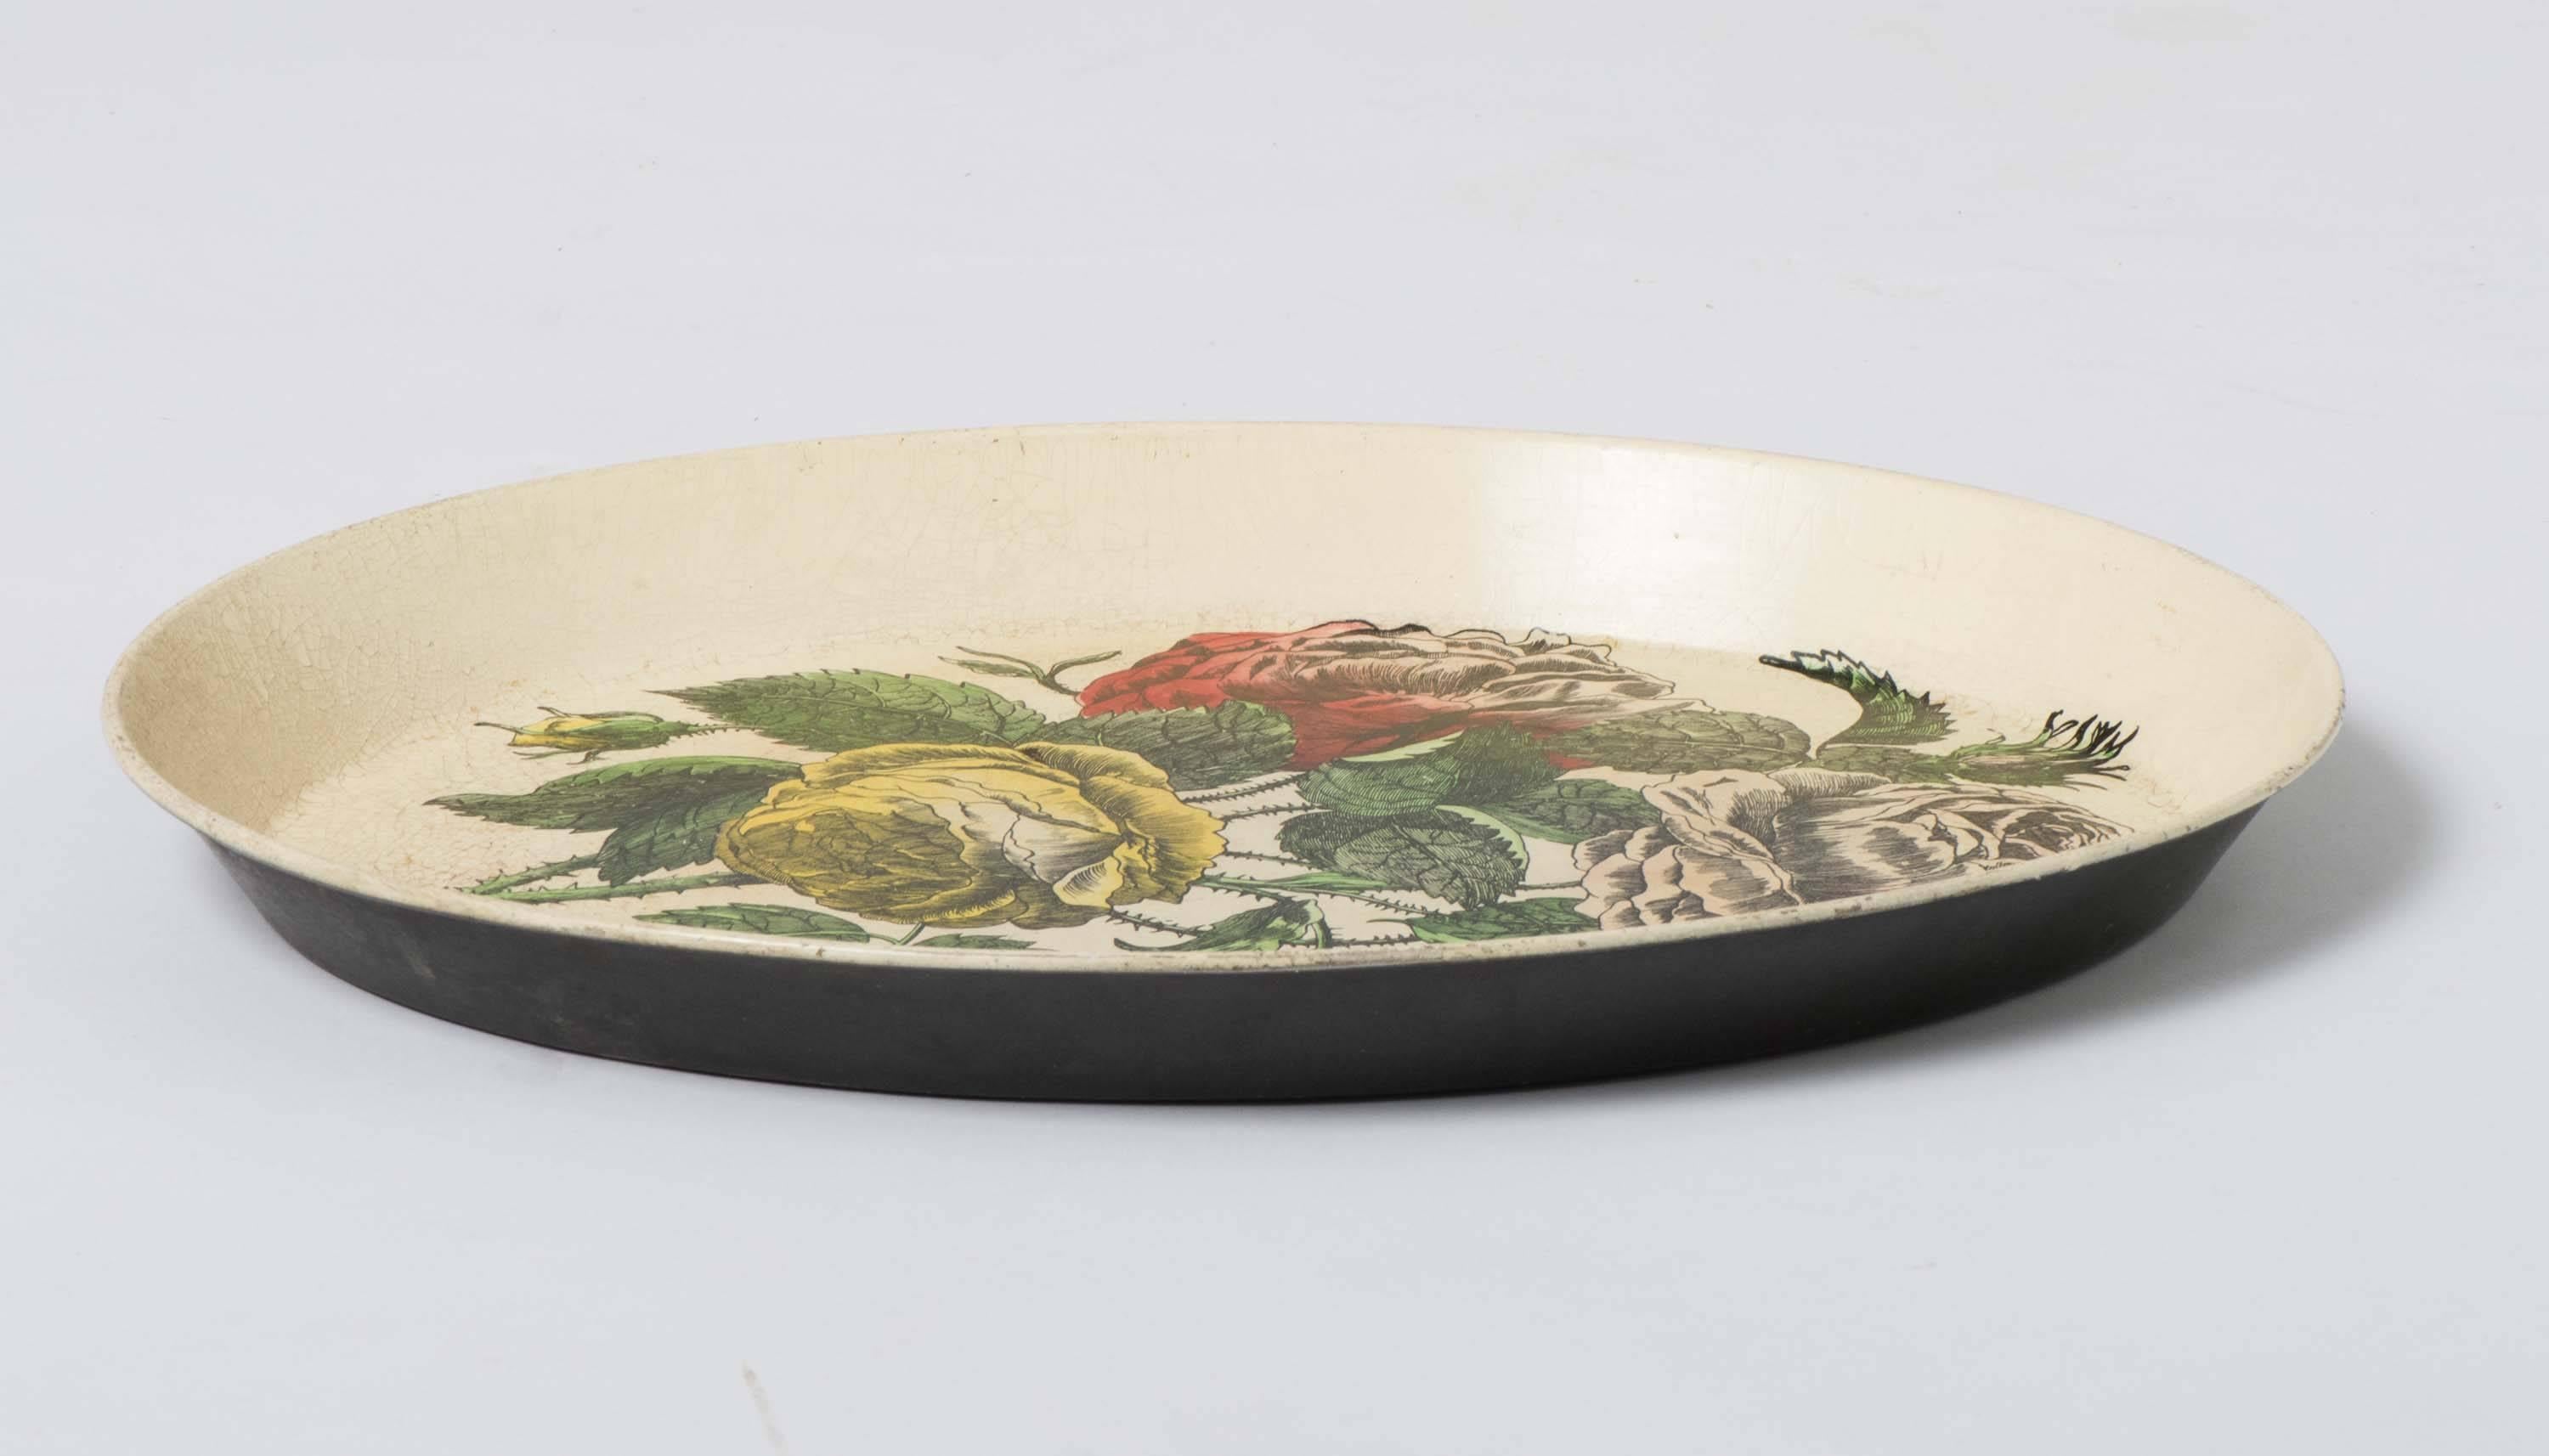 An early Piero Fornasetti oval tray.
“ROSE”
Metal, lithographically printed and hand coloured.
Italy, circa 1950.
Measures: 44.5 cm x 33.5 cm.
 